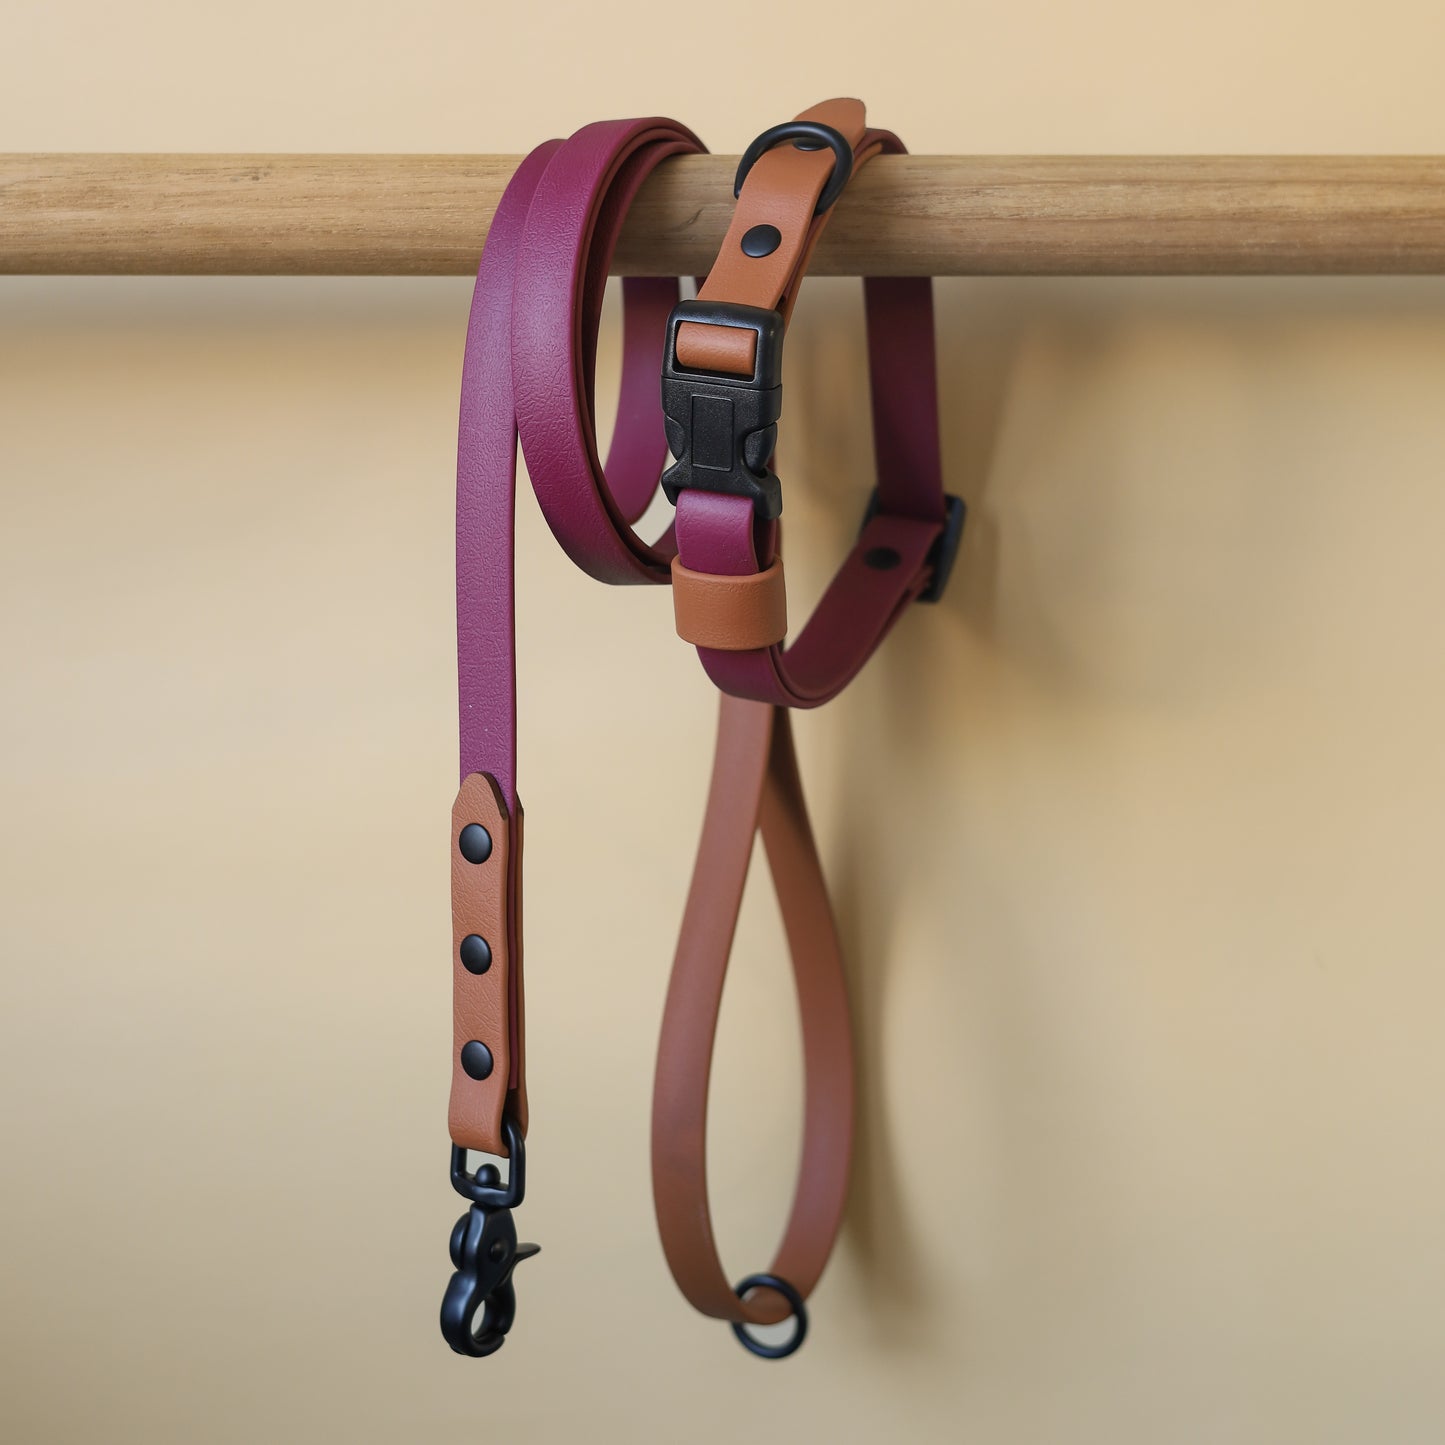 Adjustable collar with quick release buckle - two tones